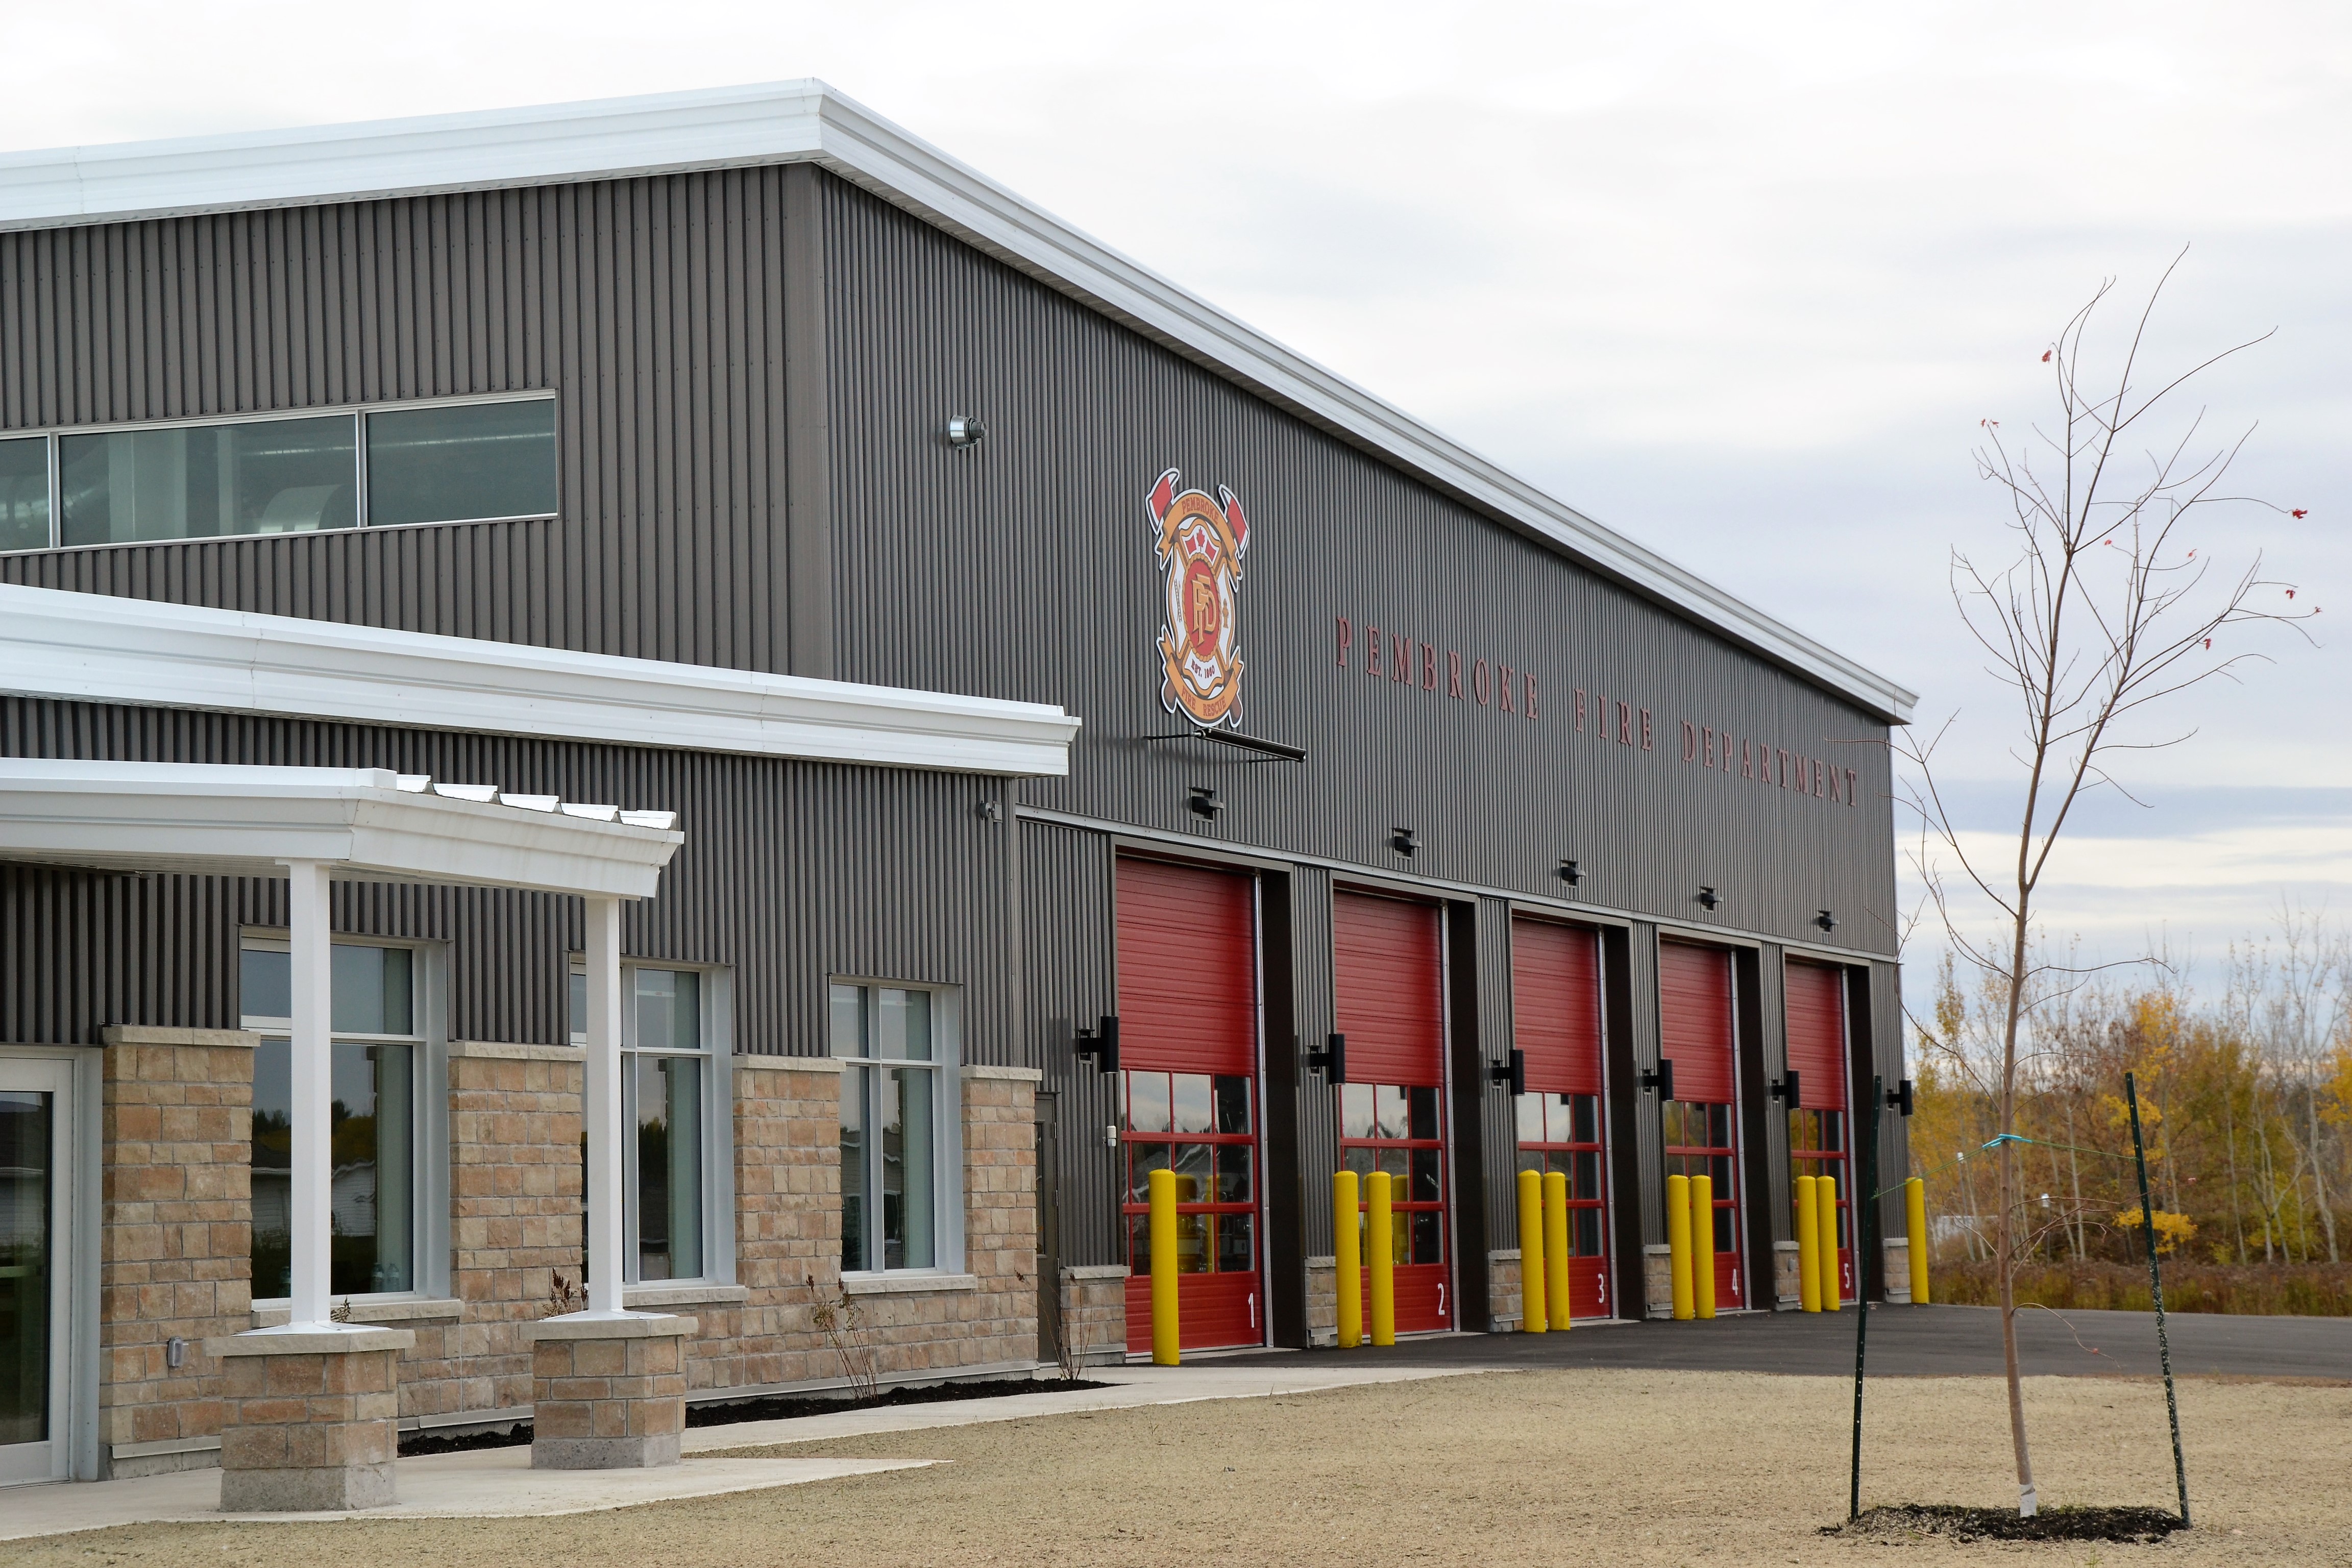 A photo of the exterior of the Pembroke Fire Hall